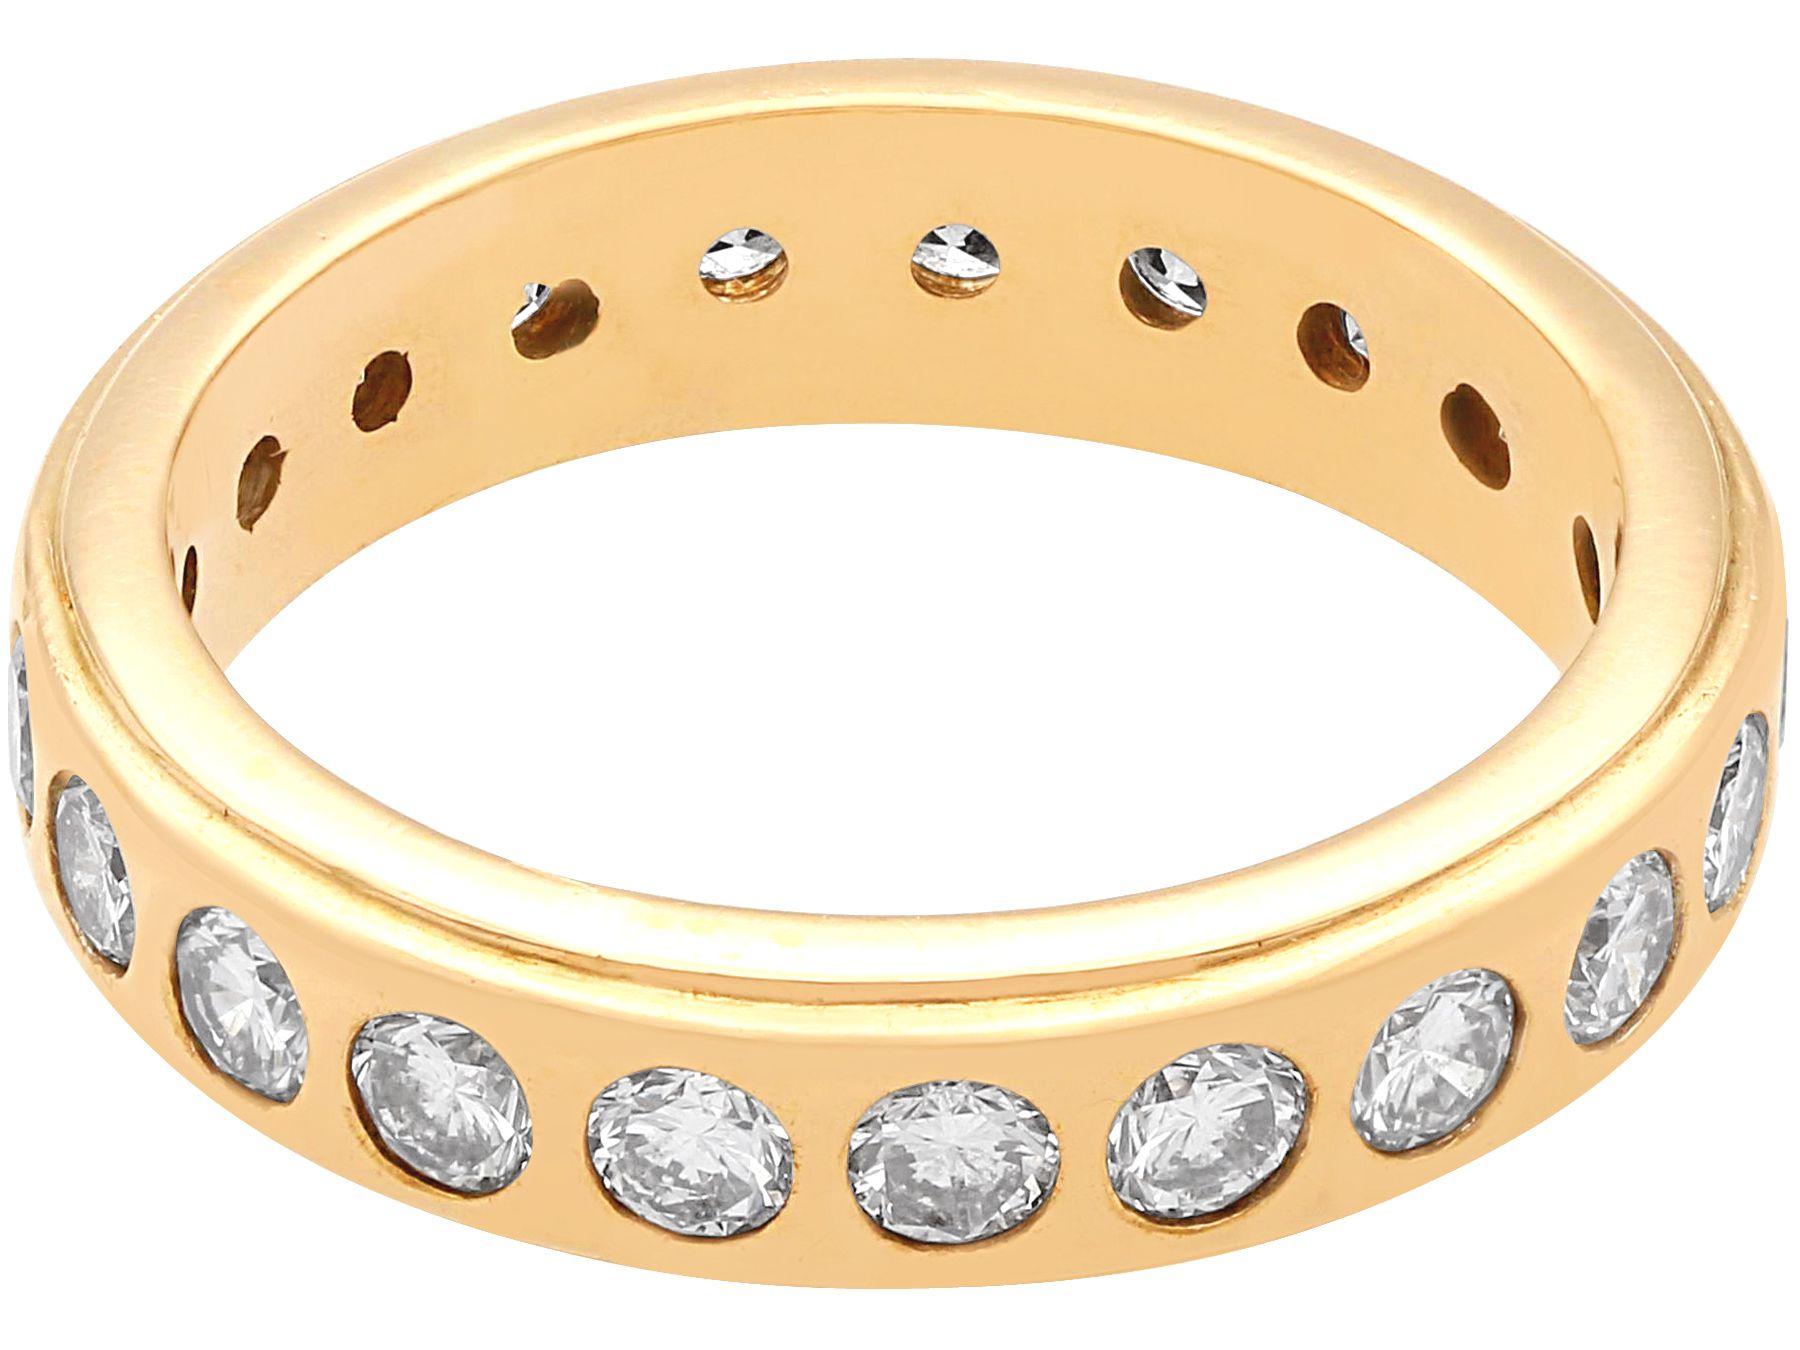 Round Cut Vintage 1.76 carat Diamond and Yellow Gold Full Eternity Ring, circa 1960 For Sale